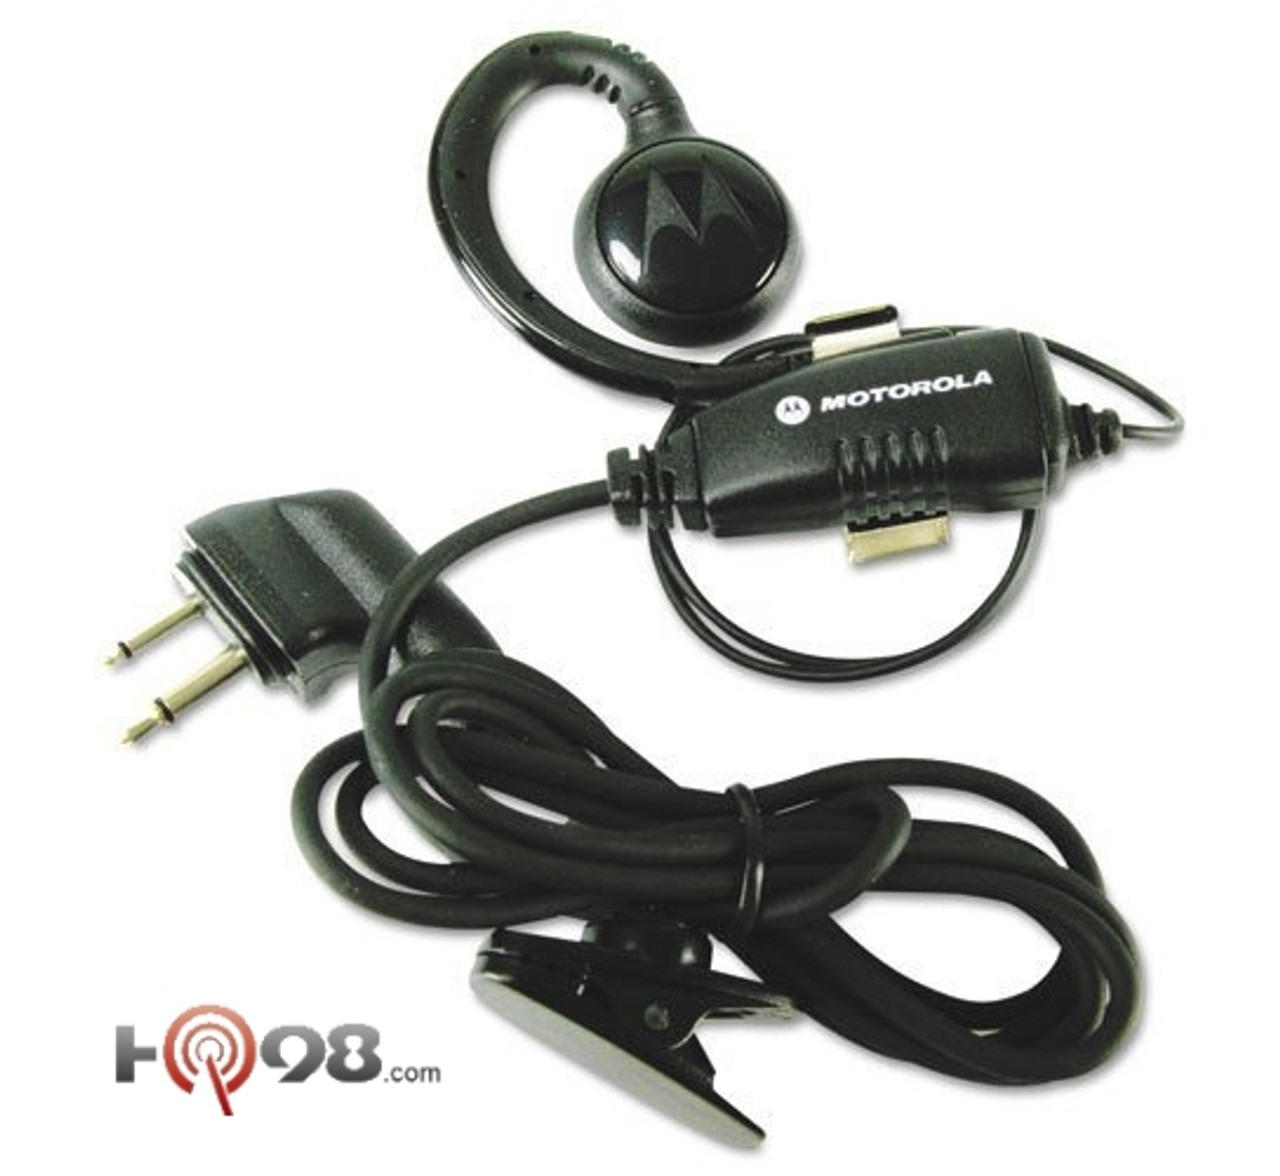 Motorola Swivel Earpiece with In-Line Push-To-Talk Microphone is the  RLN6423A. Free Shipping is included.